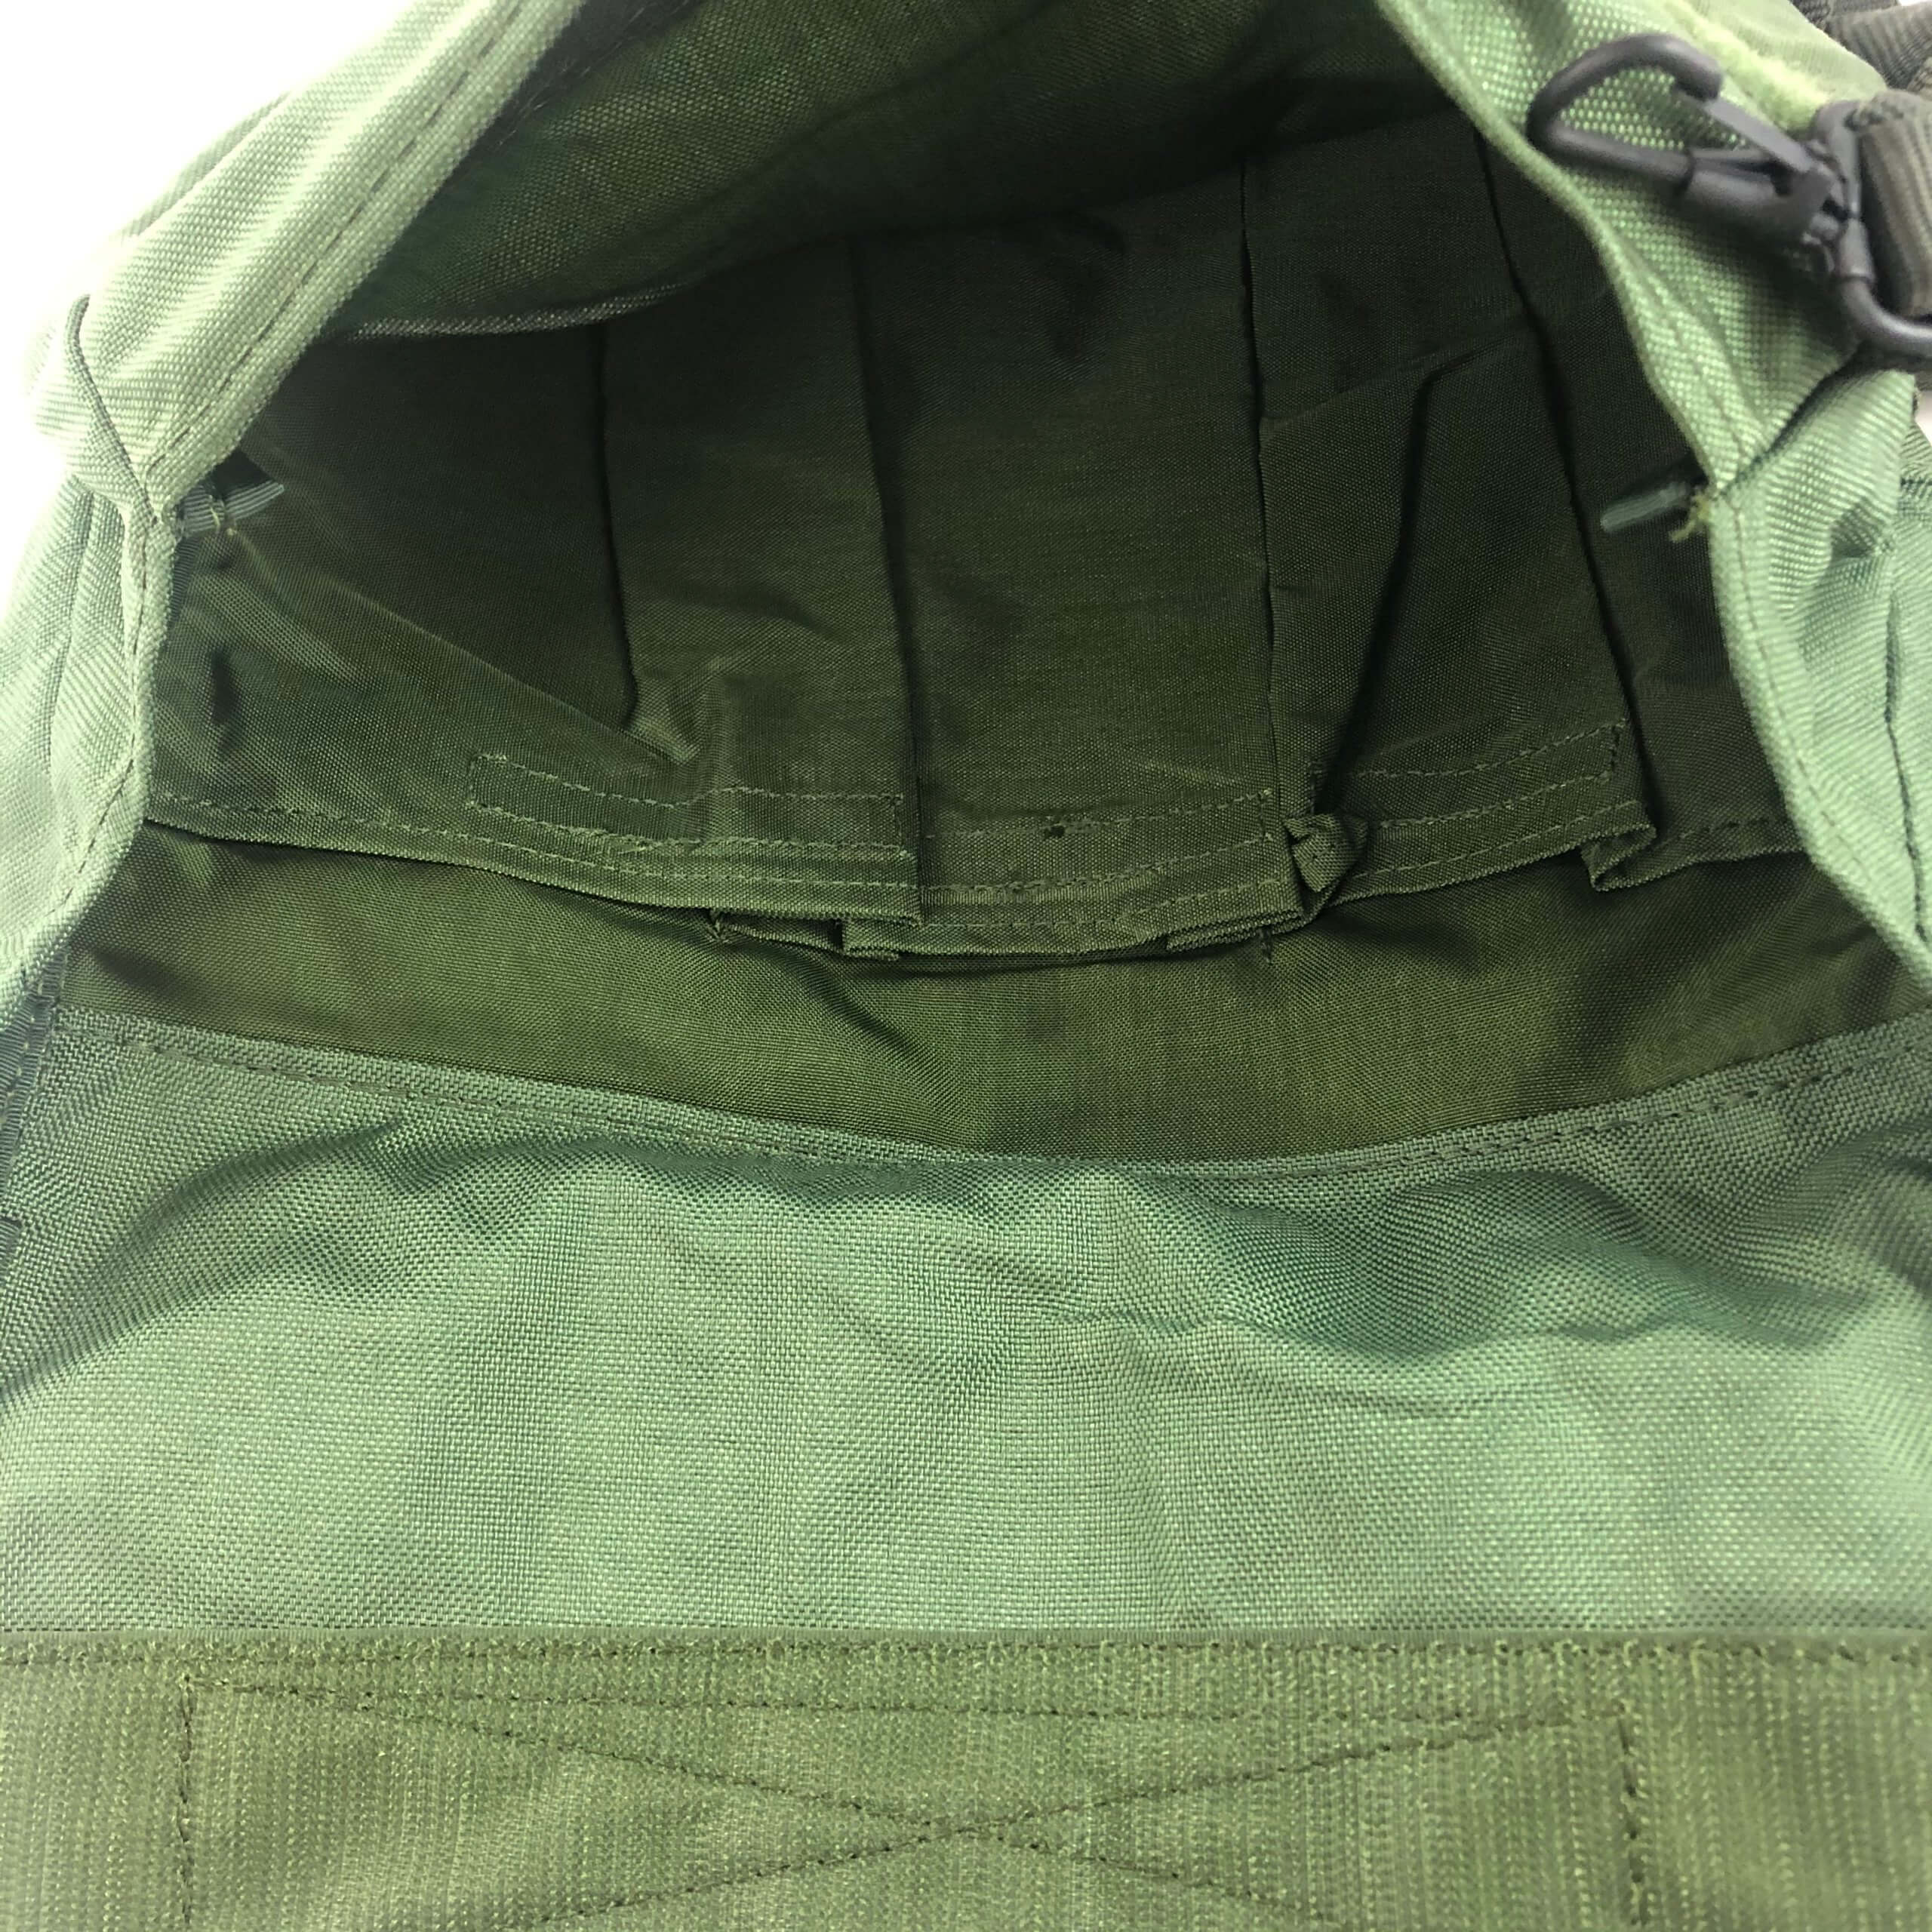 M40 Gas Mask Carrier Assembly Pouch [Genuine Army Issue]